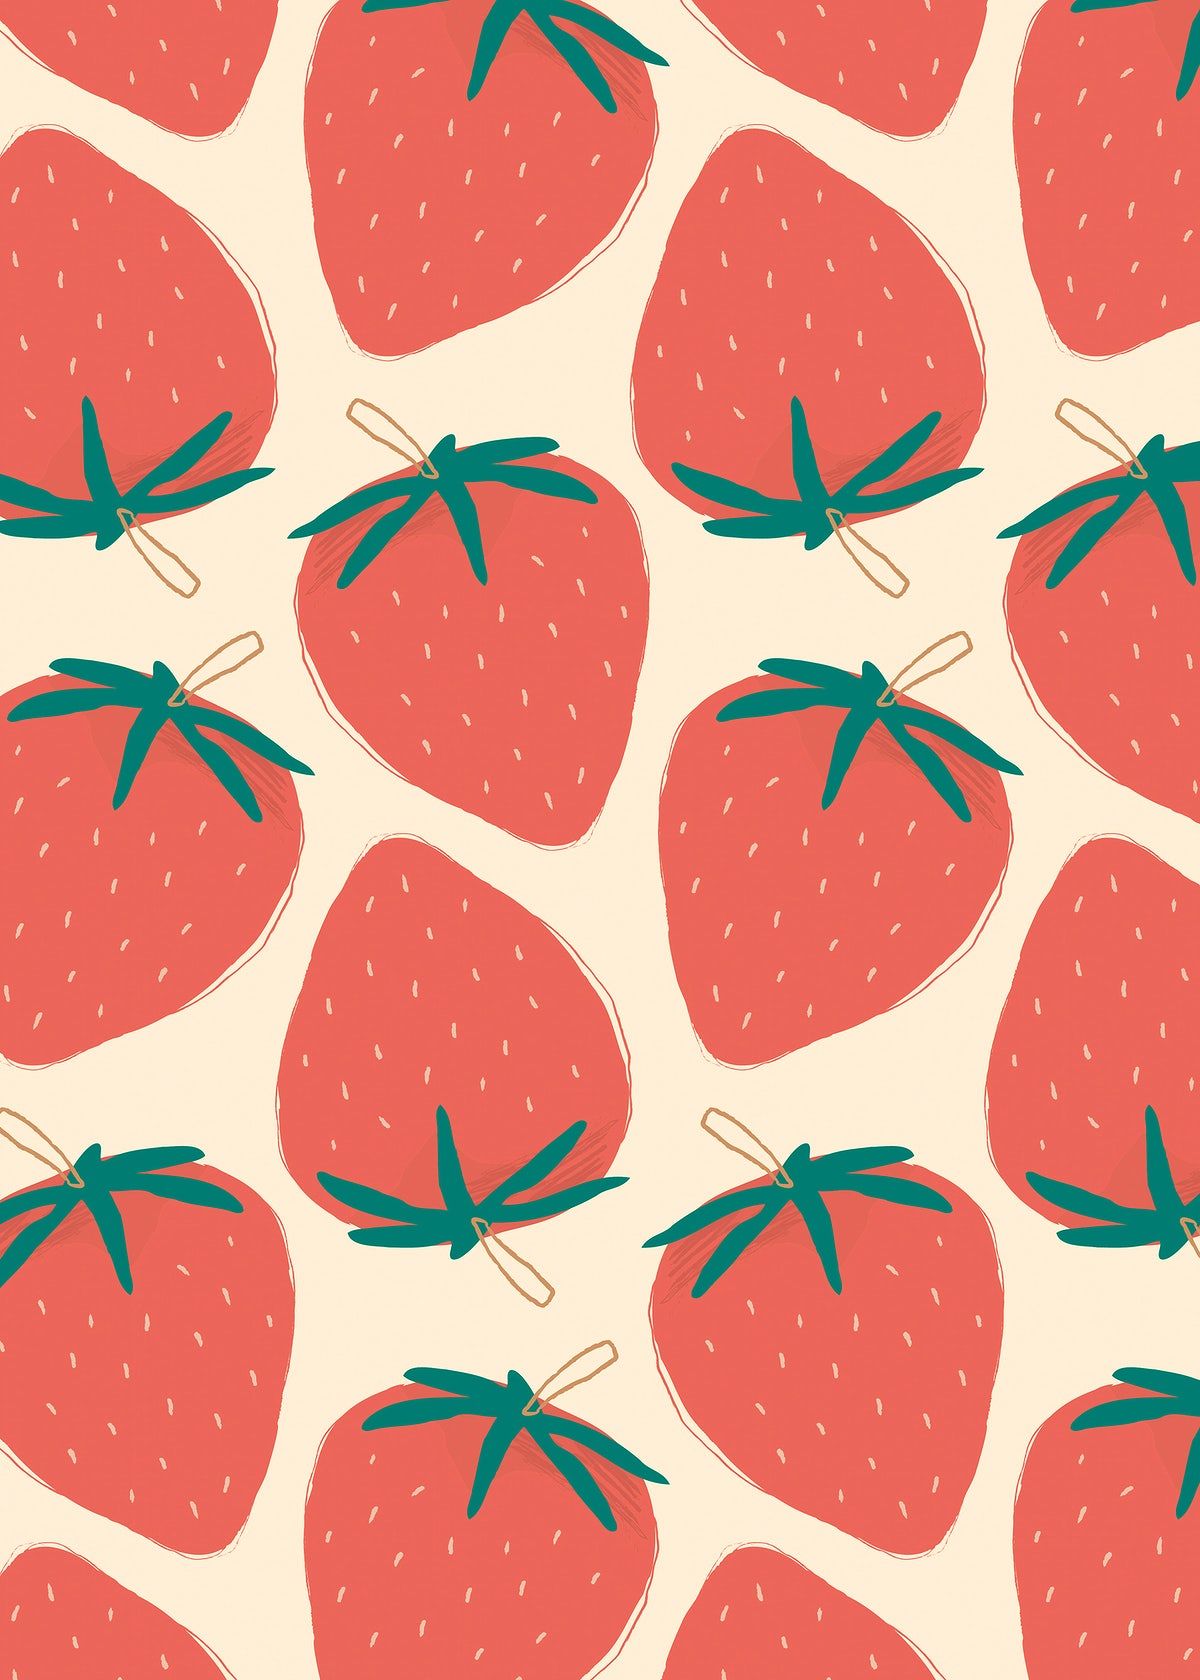 A pattern of strawberries - Strawberry